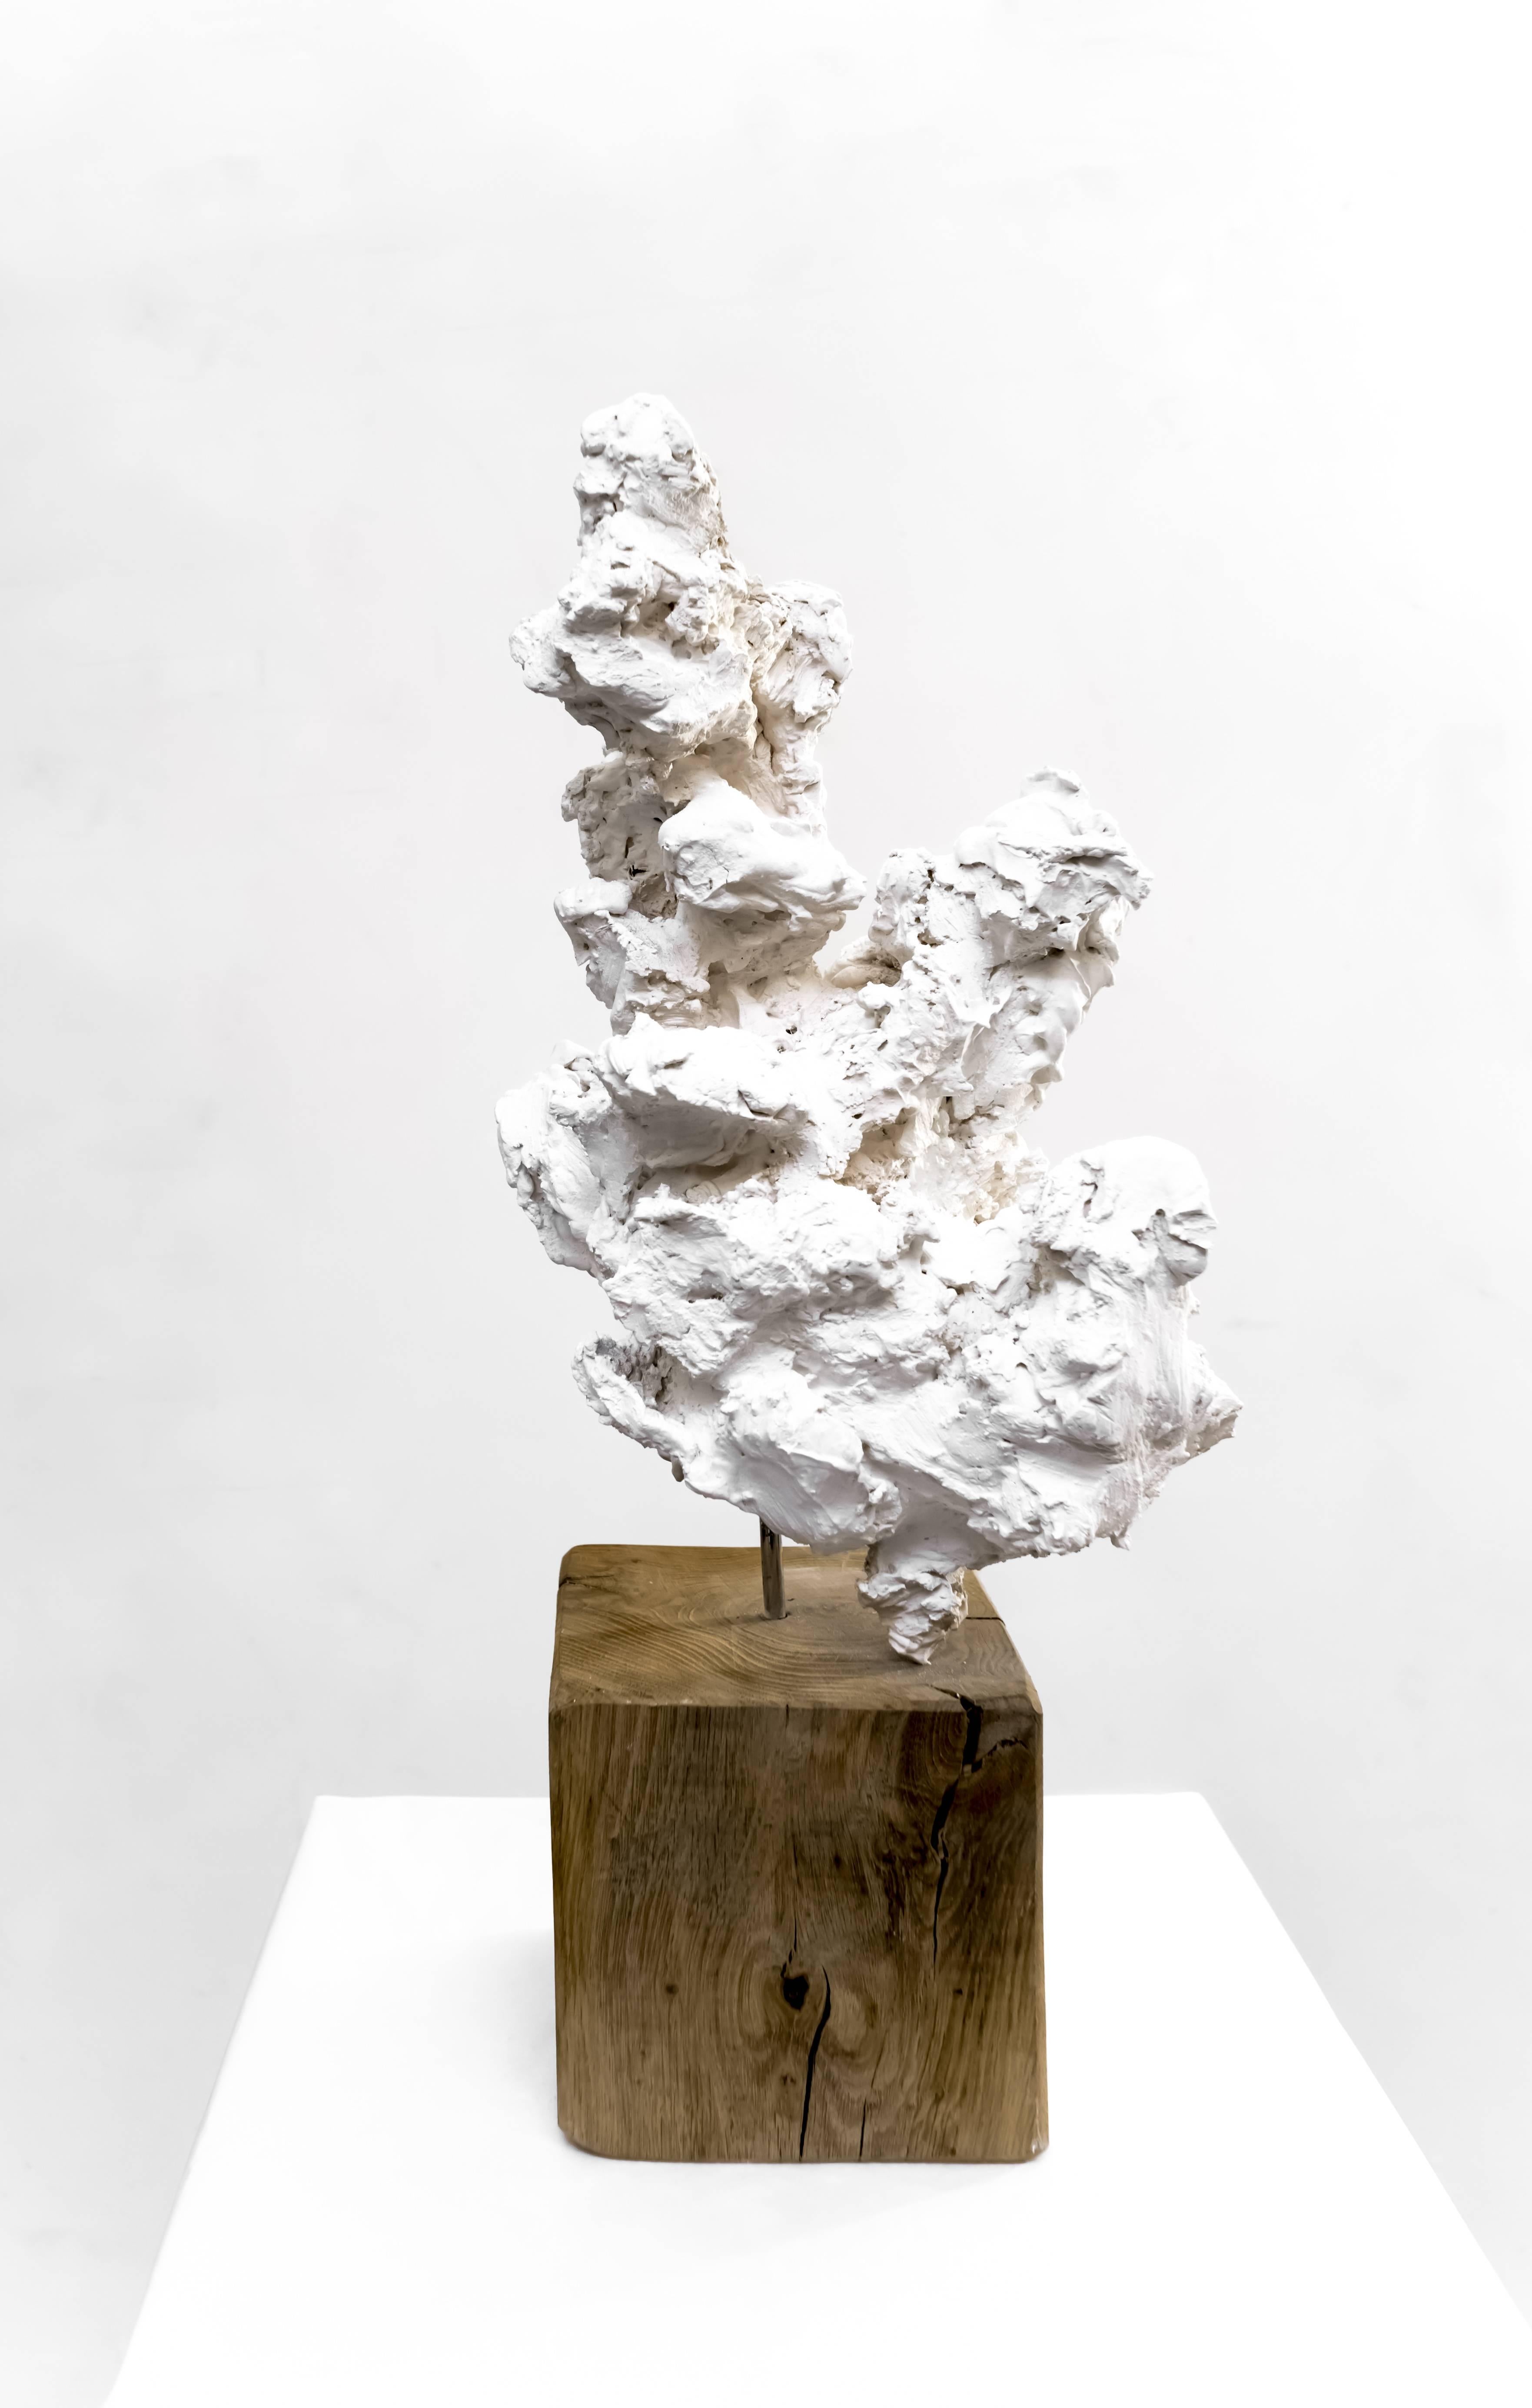 Guy Haddon Grant Abstract Sculpture - Cloud Studies no. 2 - Contemporary painted bronze and oak wood by Guy Haddon